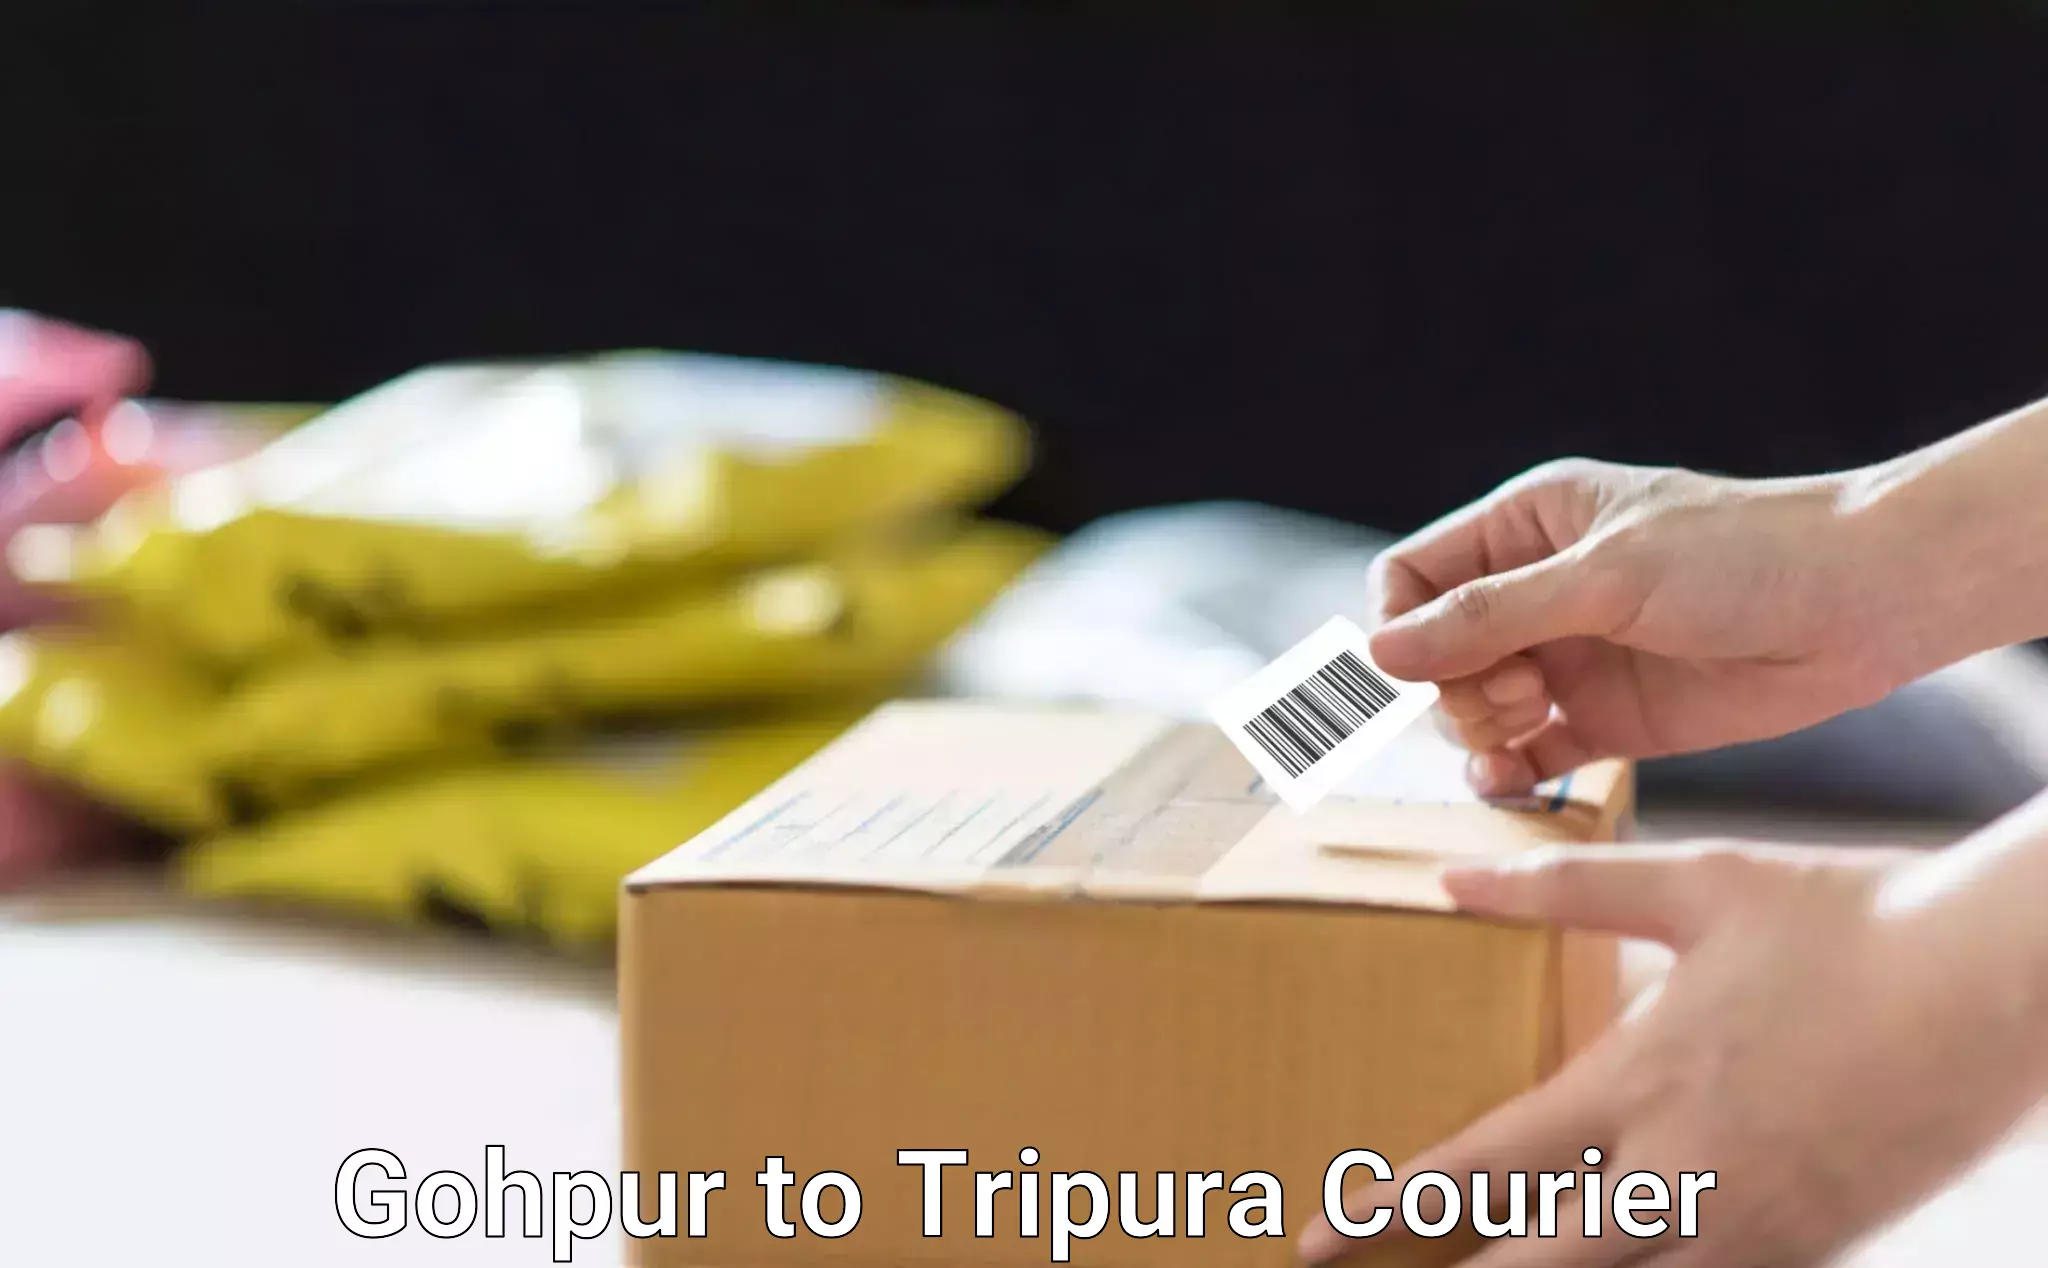 Express courier capabilities Gohpur to Udaipur Tripura